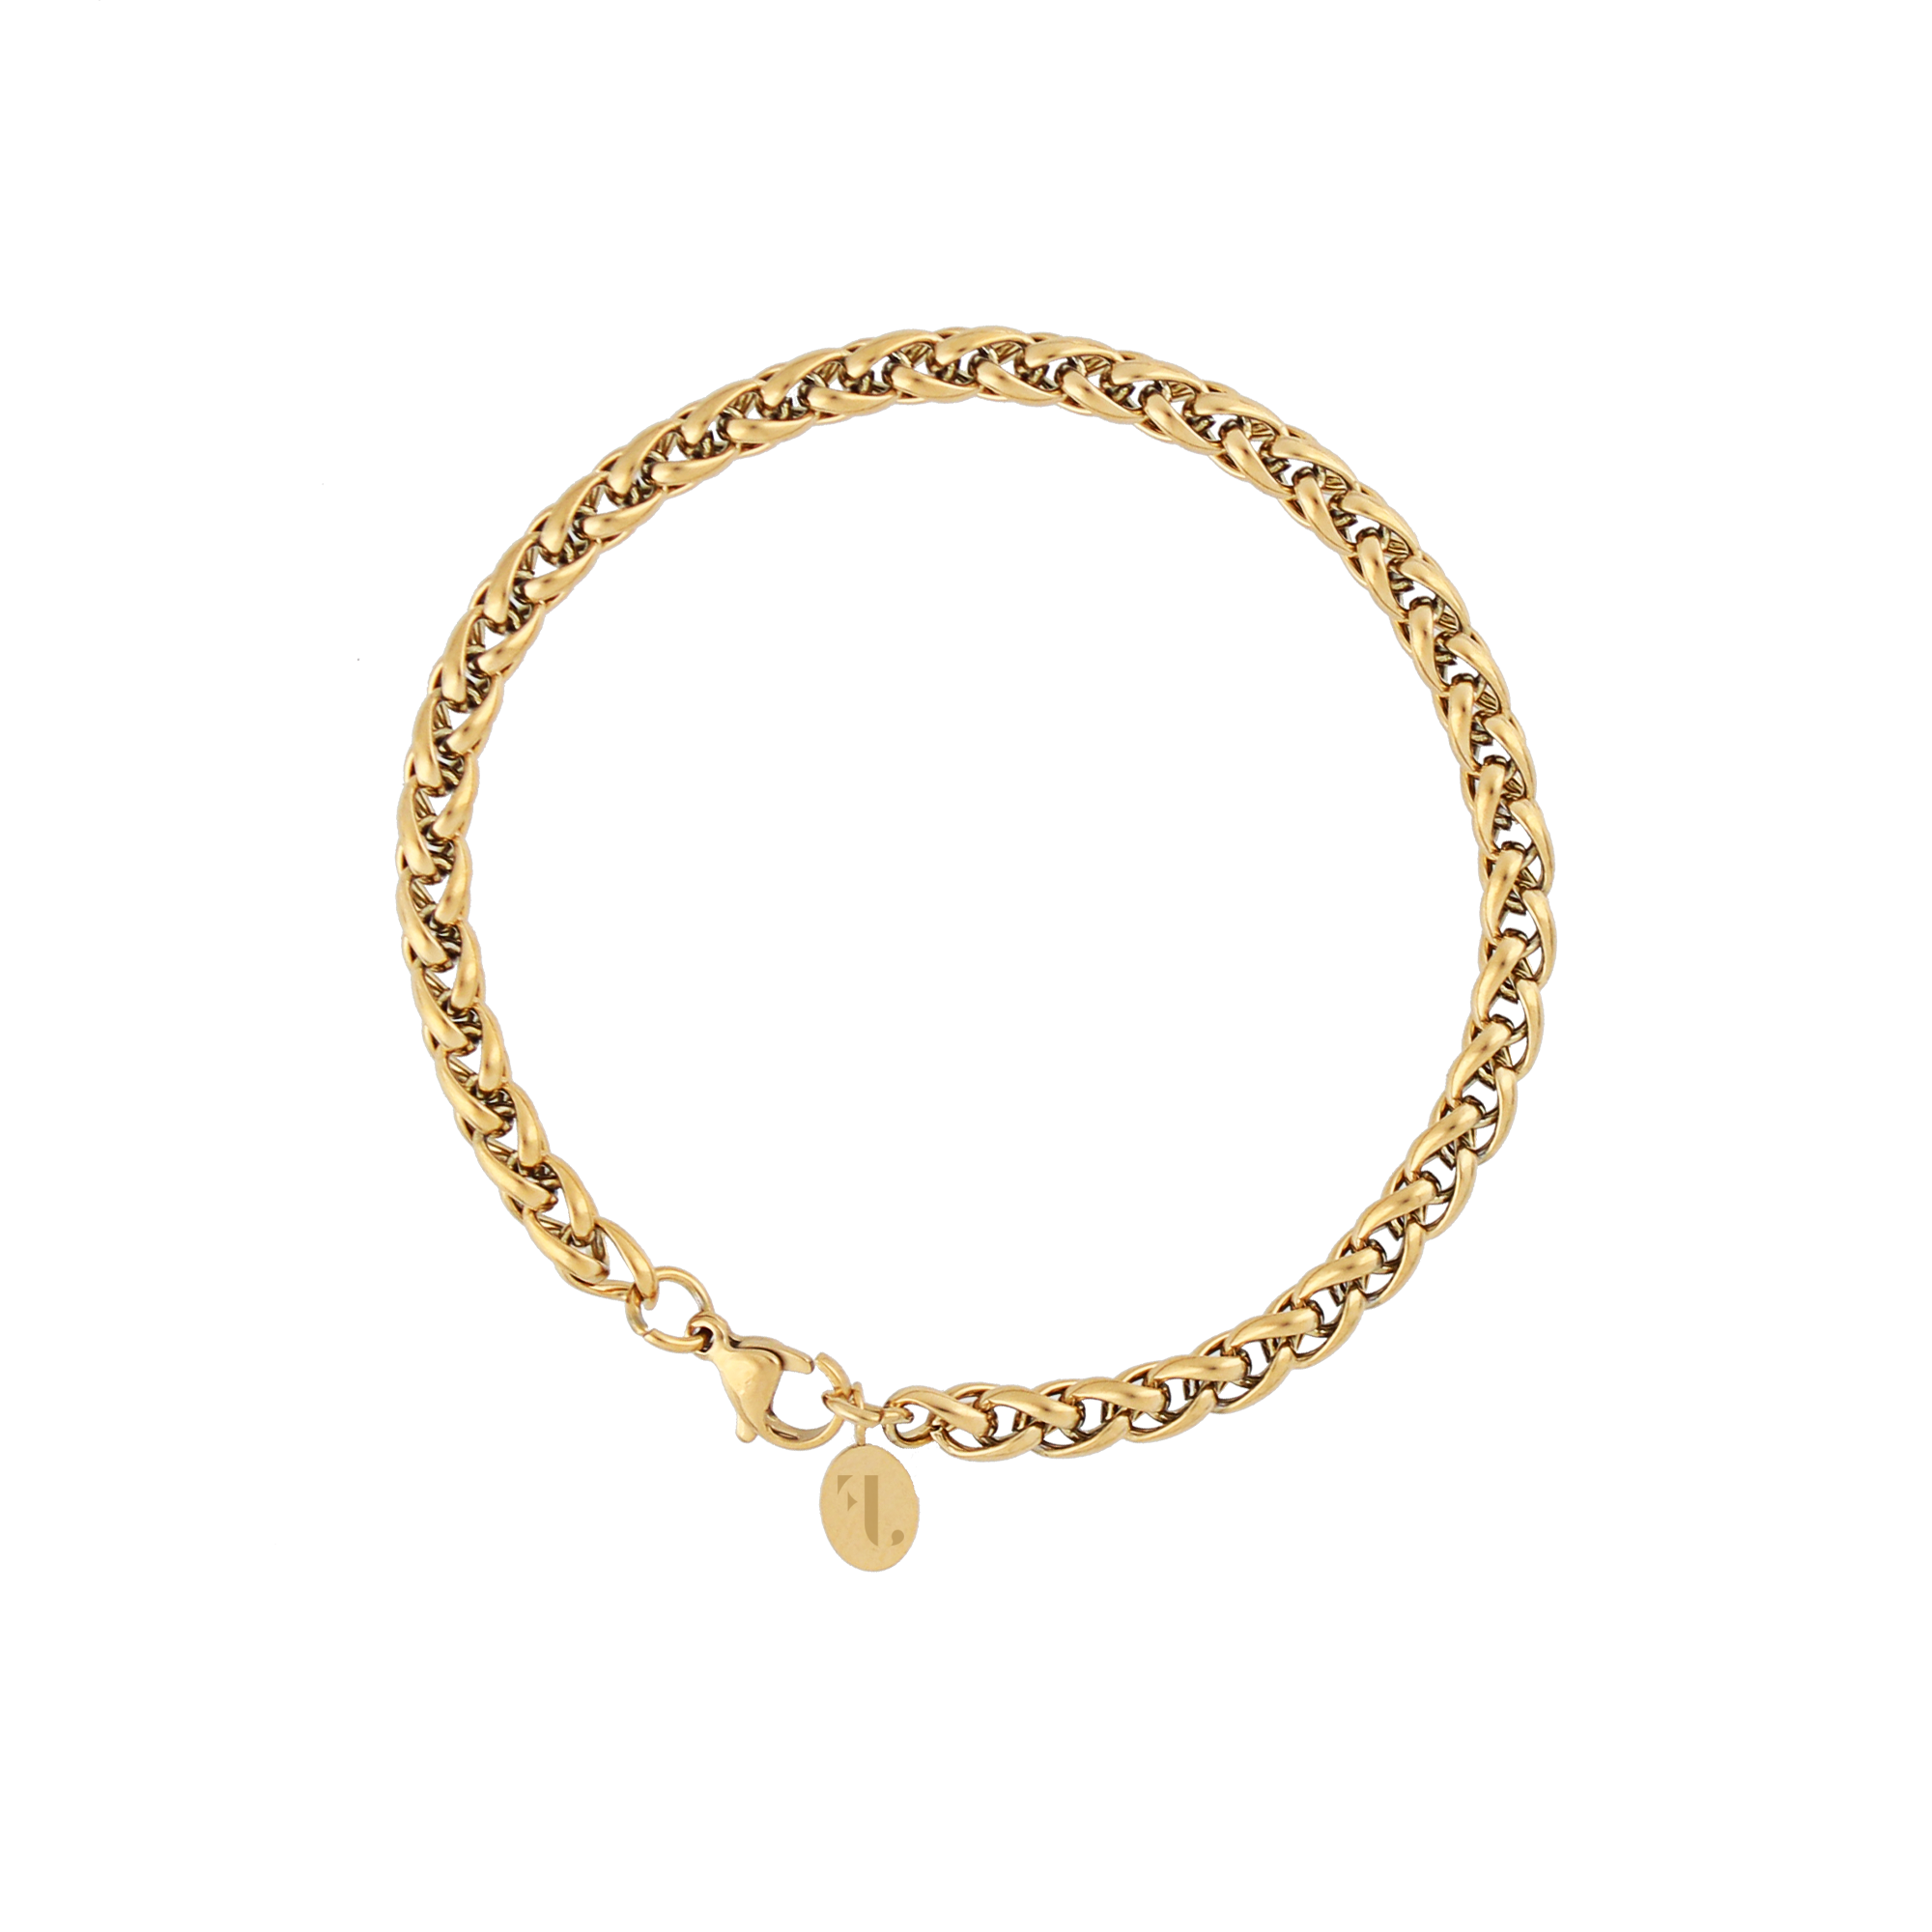 TAGE men's bracelet by Five Jwlry, designed with a 5mm wheat chain inspired by flower basket chains in gold-colored, water-resistant 316L stainless steel. Available in sizes 20cm and 23cm. Hypoallergenic with a 2-year warranty.